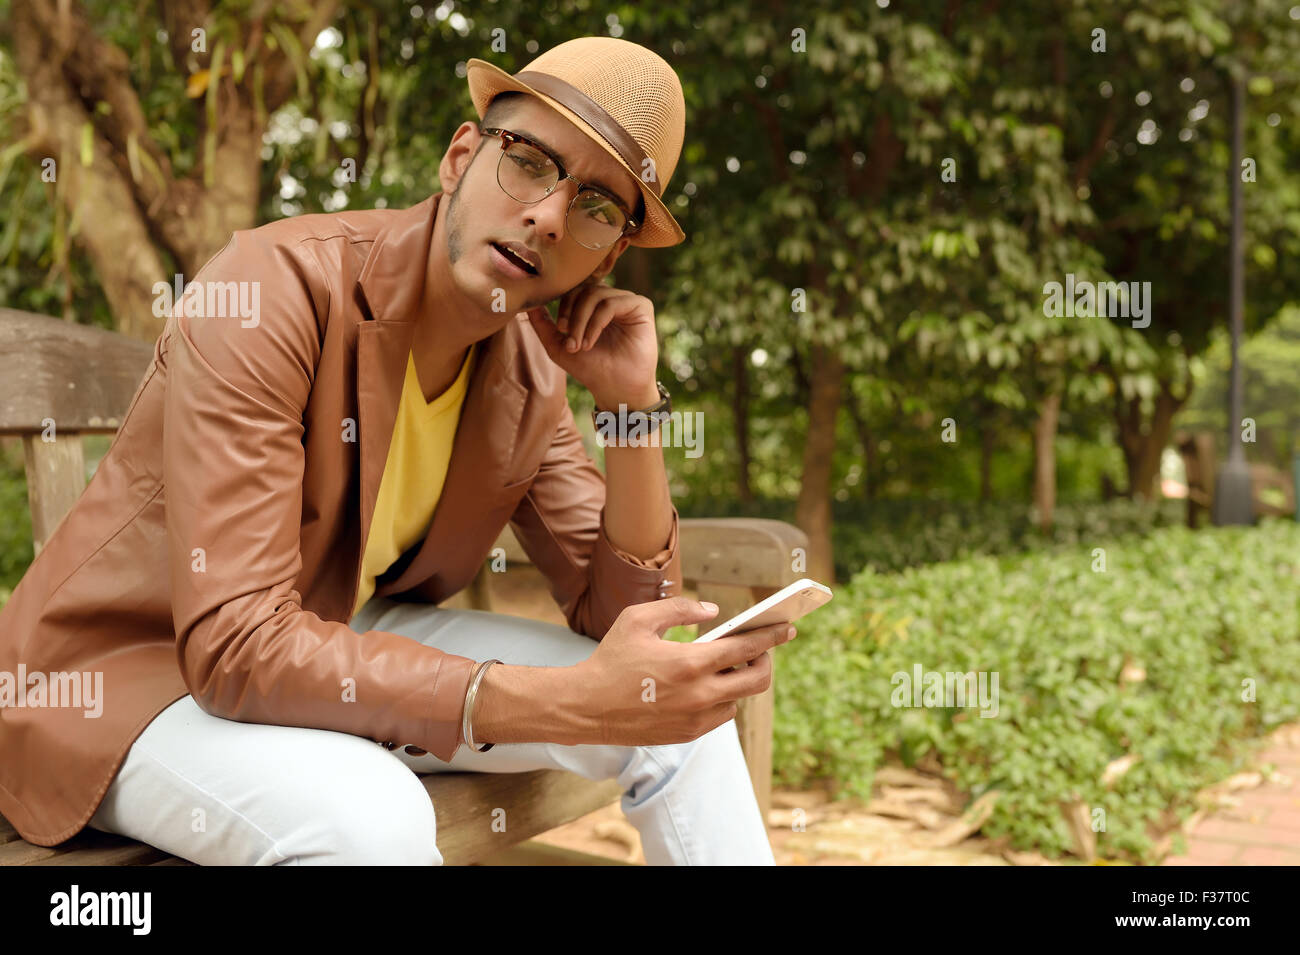 Asian , Man , Indian Ethnicities , Smart Phone , Casual Clothing , Outdoor . Stock Photo